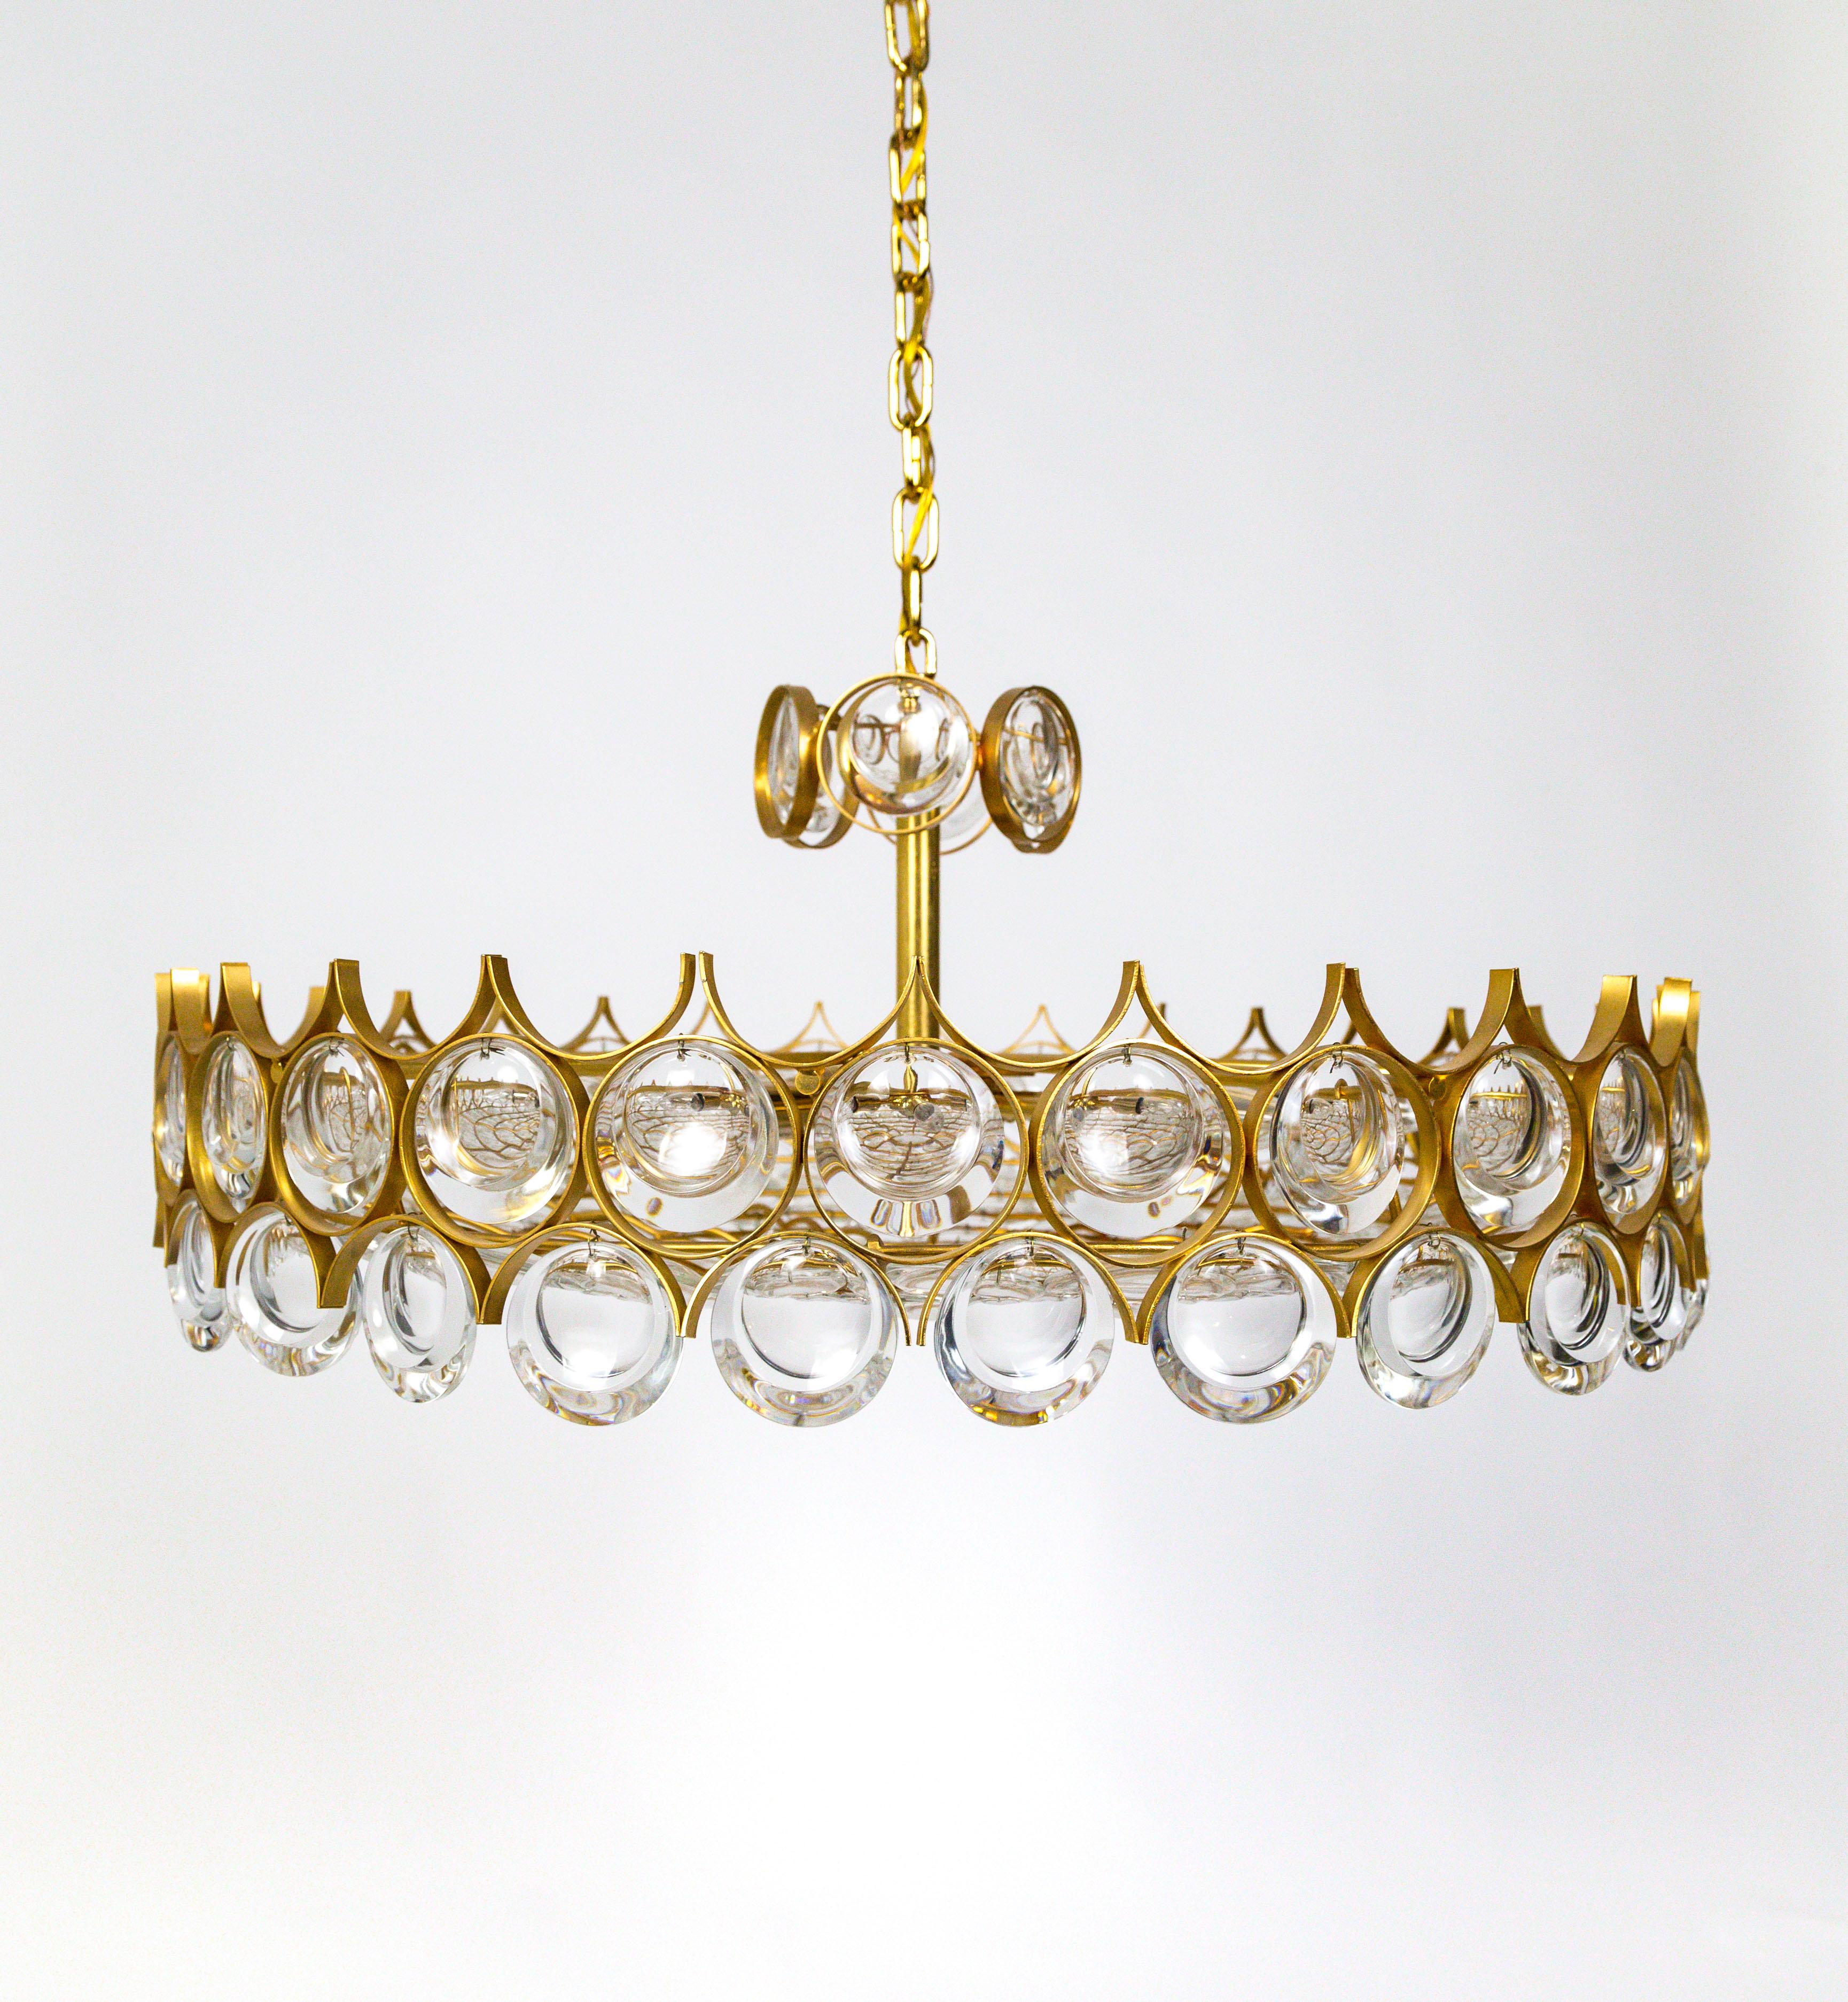 An elegant chandelier filled with dangling and strung, optical lens crystals in a gold armature forming a streamlined, modern shape. Created by Palwa of Germany in the 1960s.
With 9 candelabra lights, newly rewired. 27